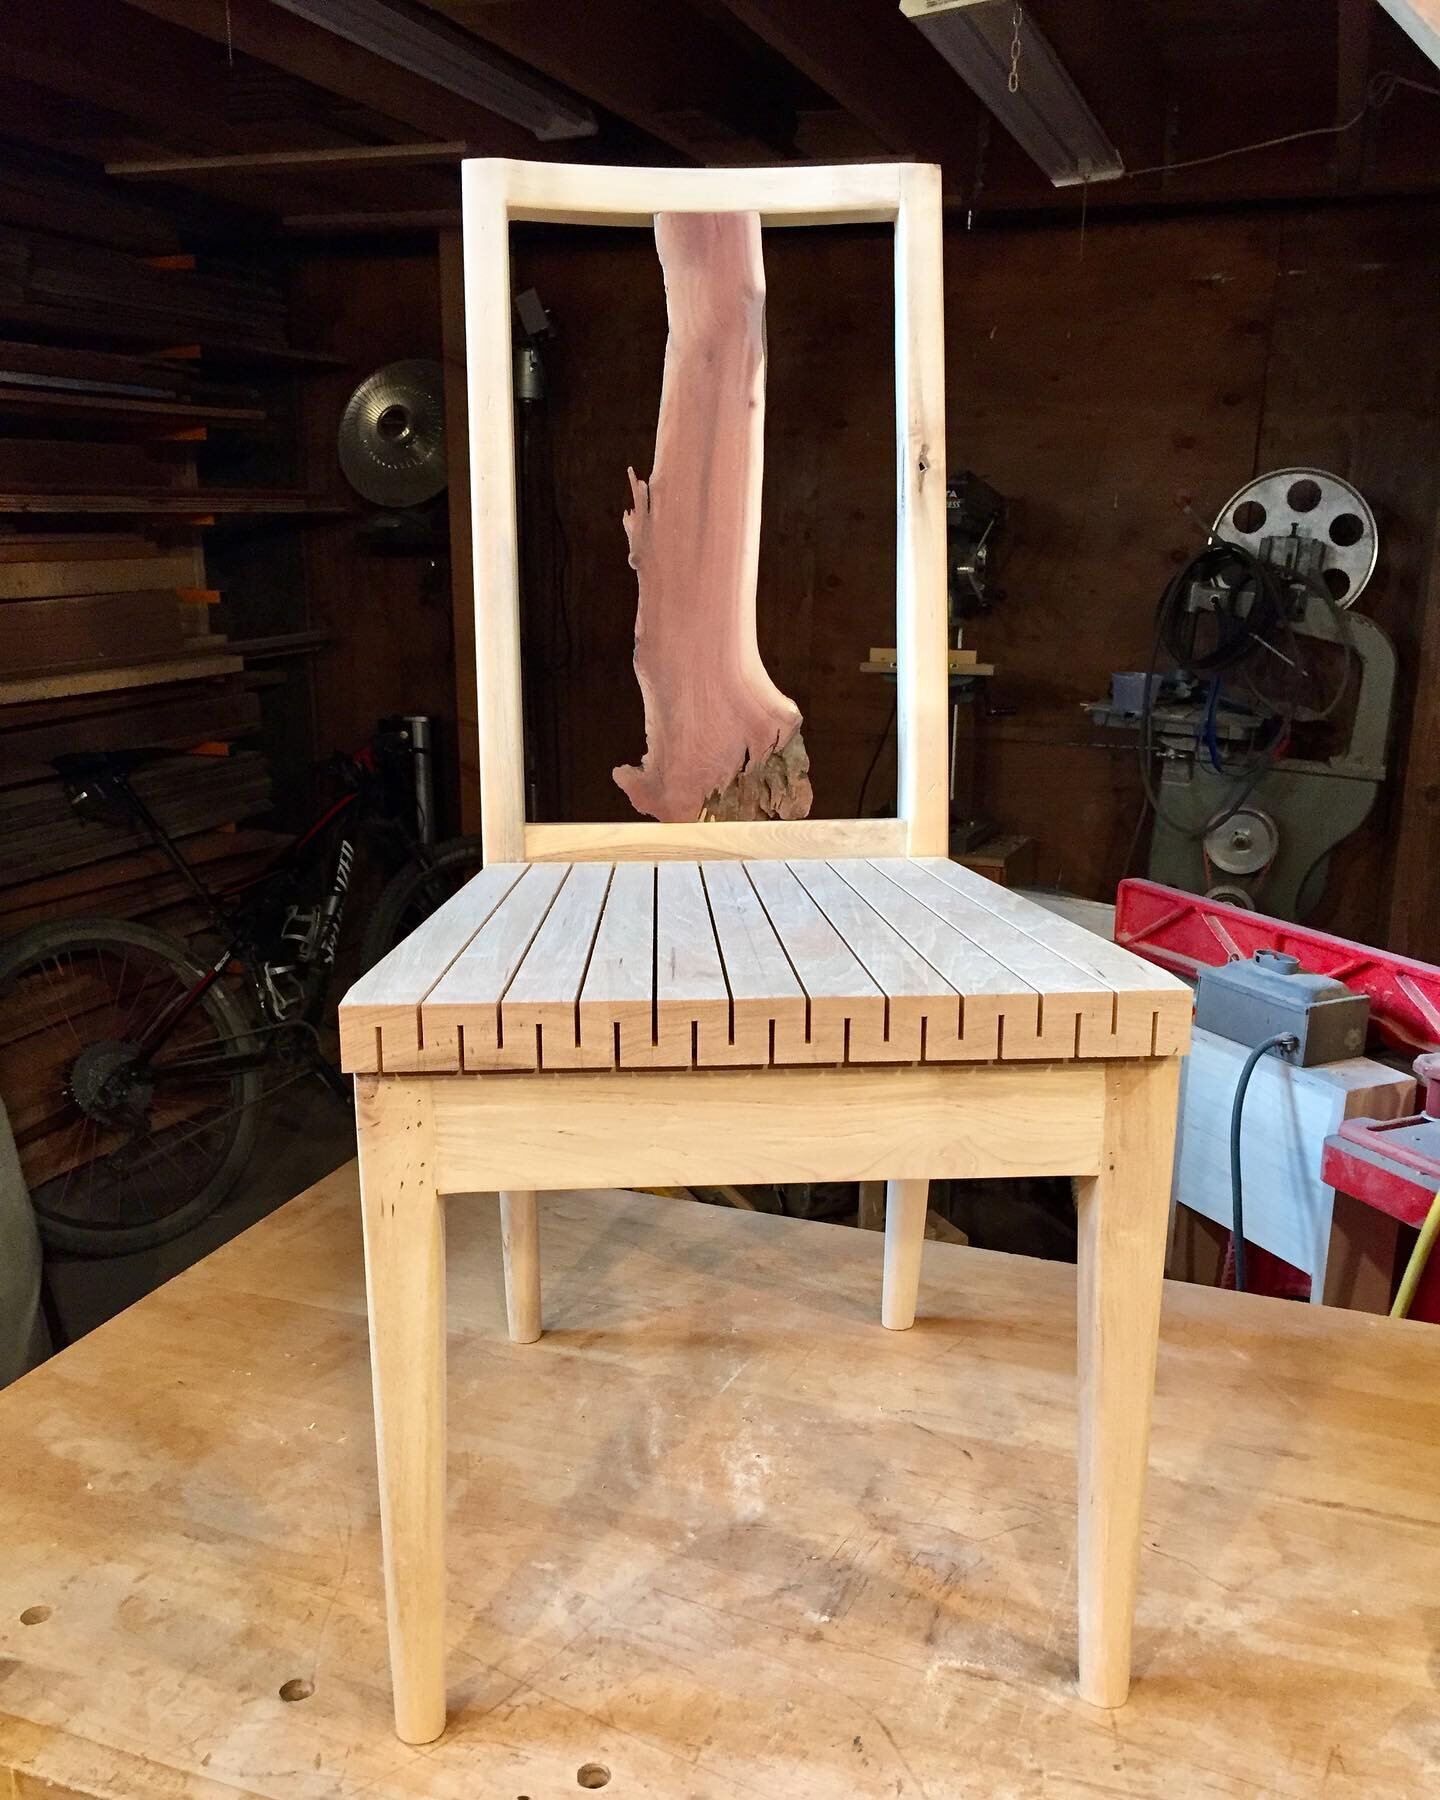 Another chair on the way